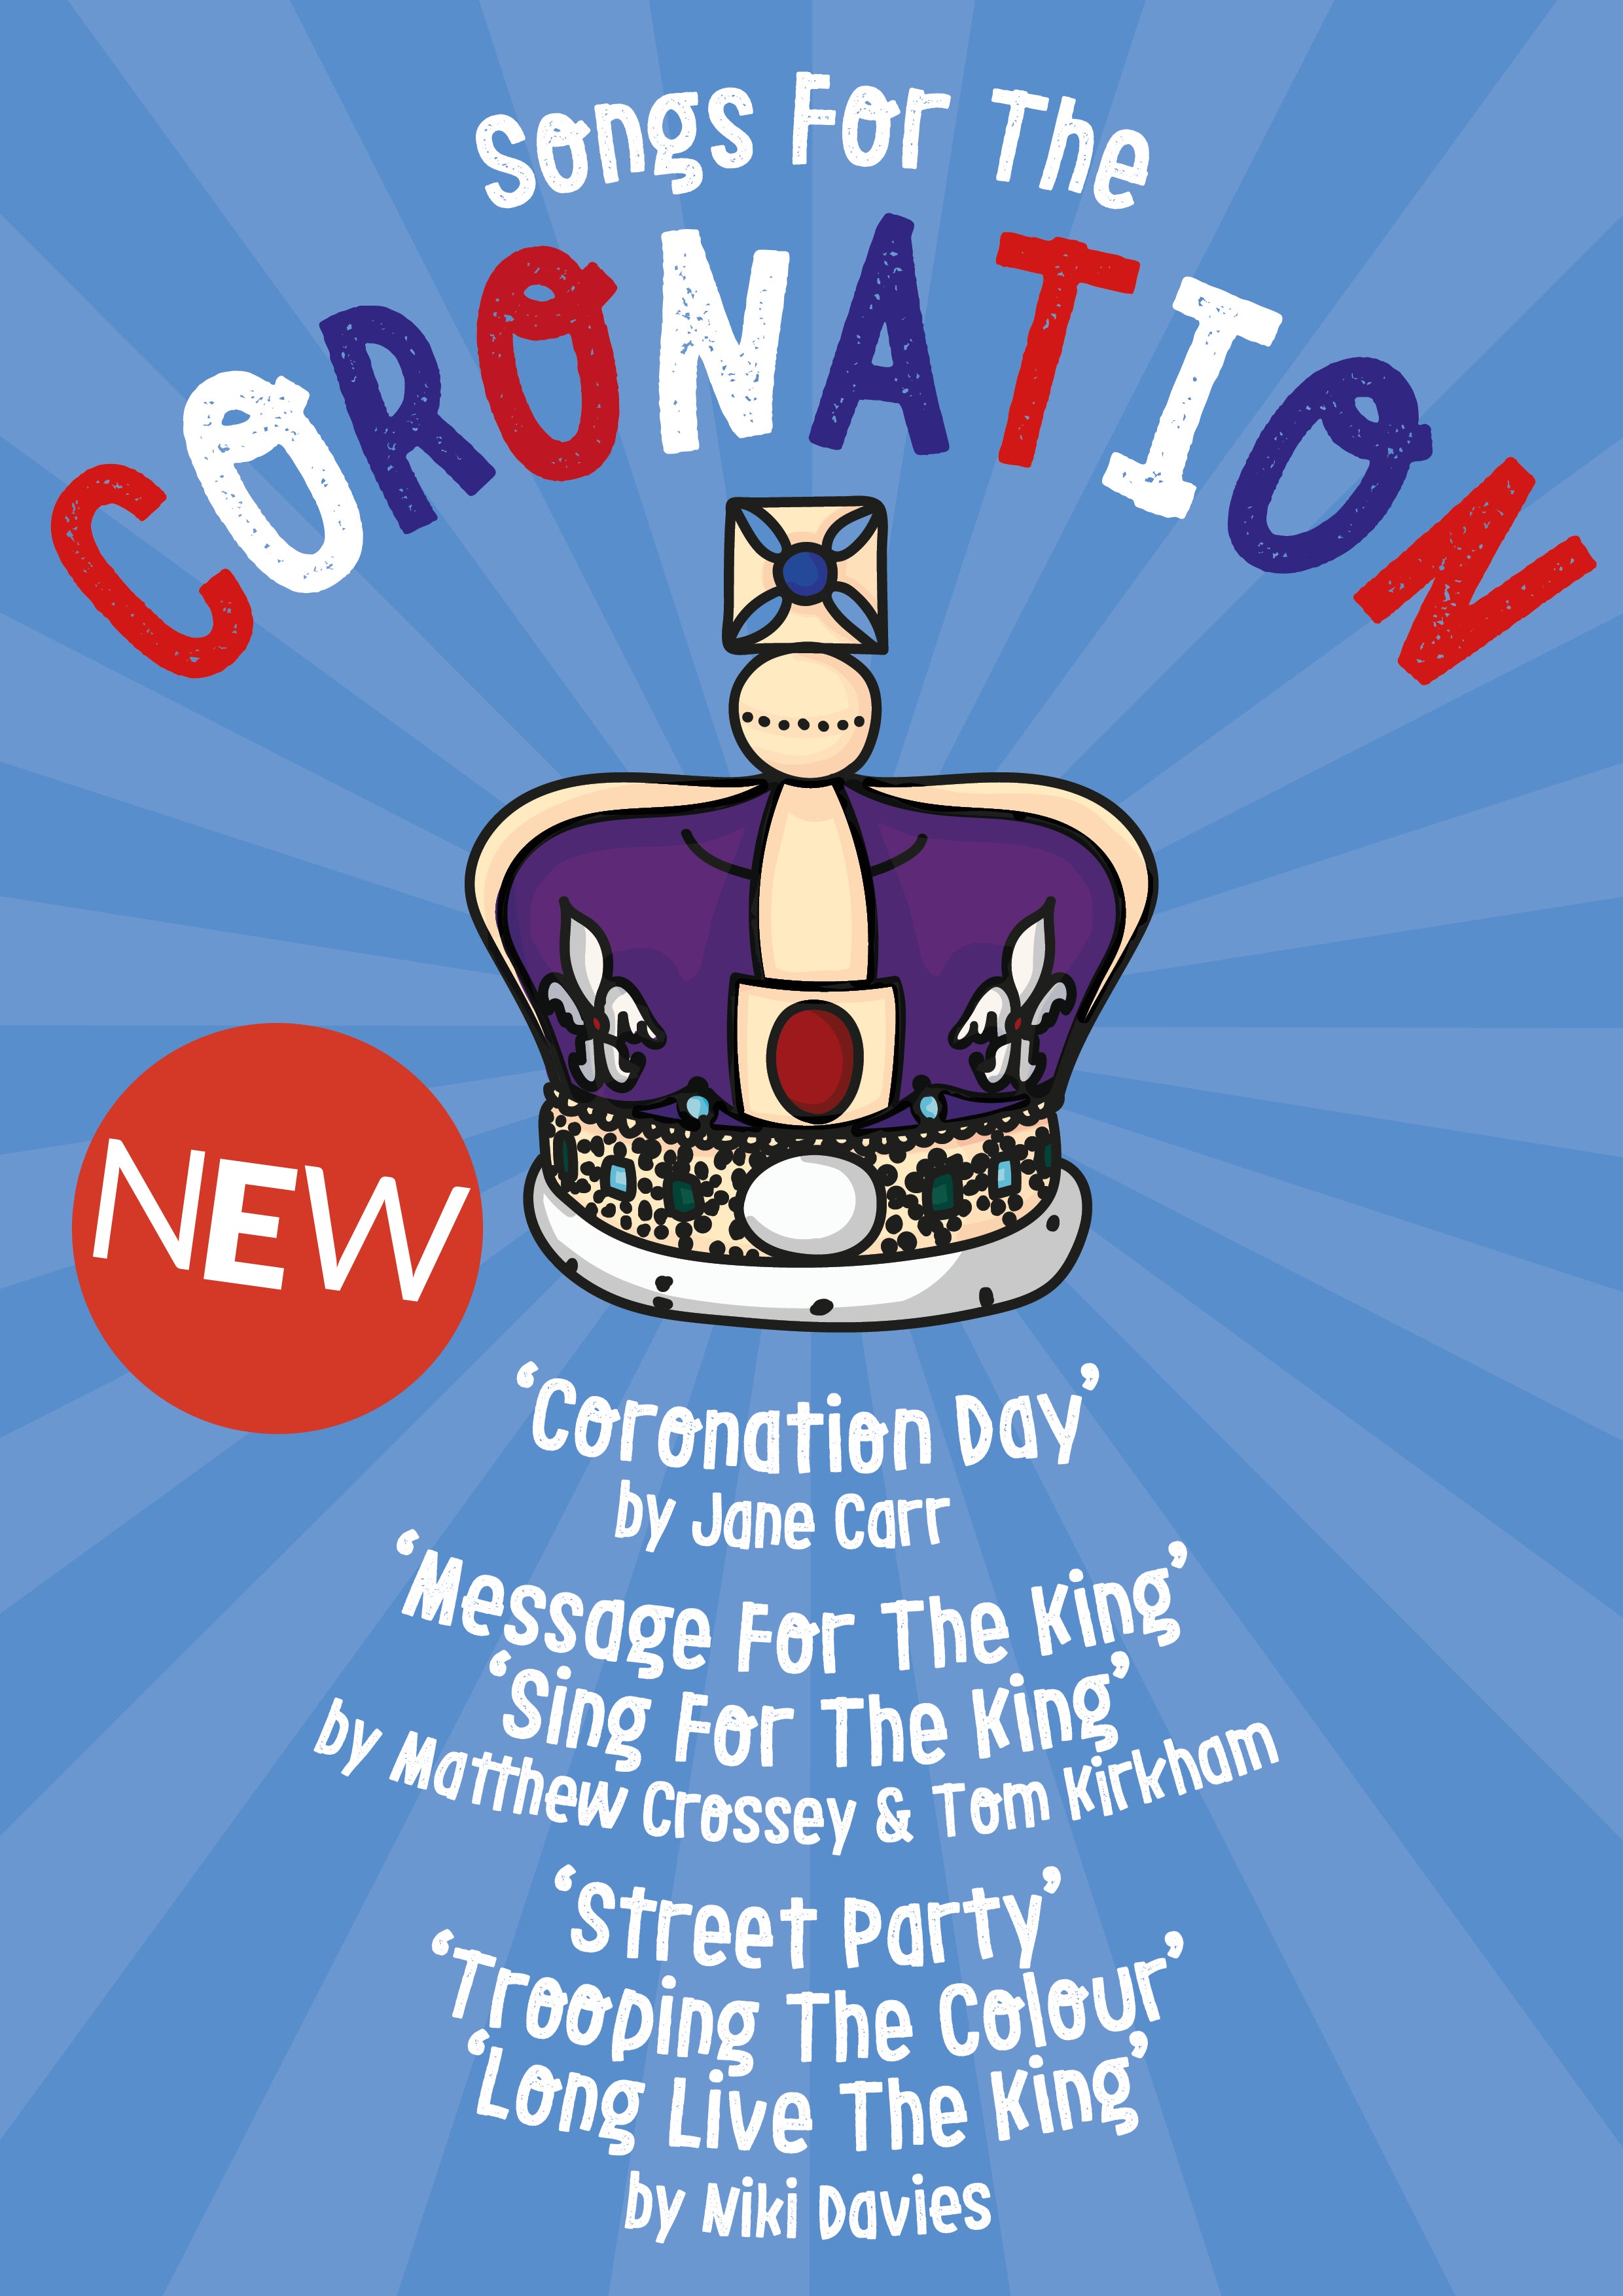 FREE SONGS FOR THE CORONATION